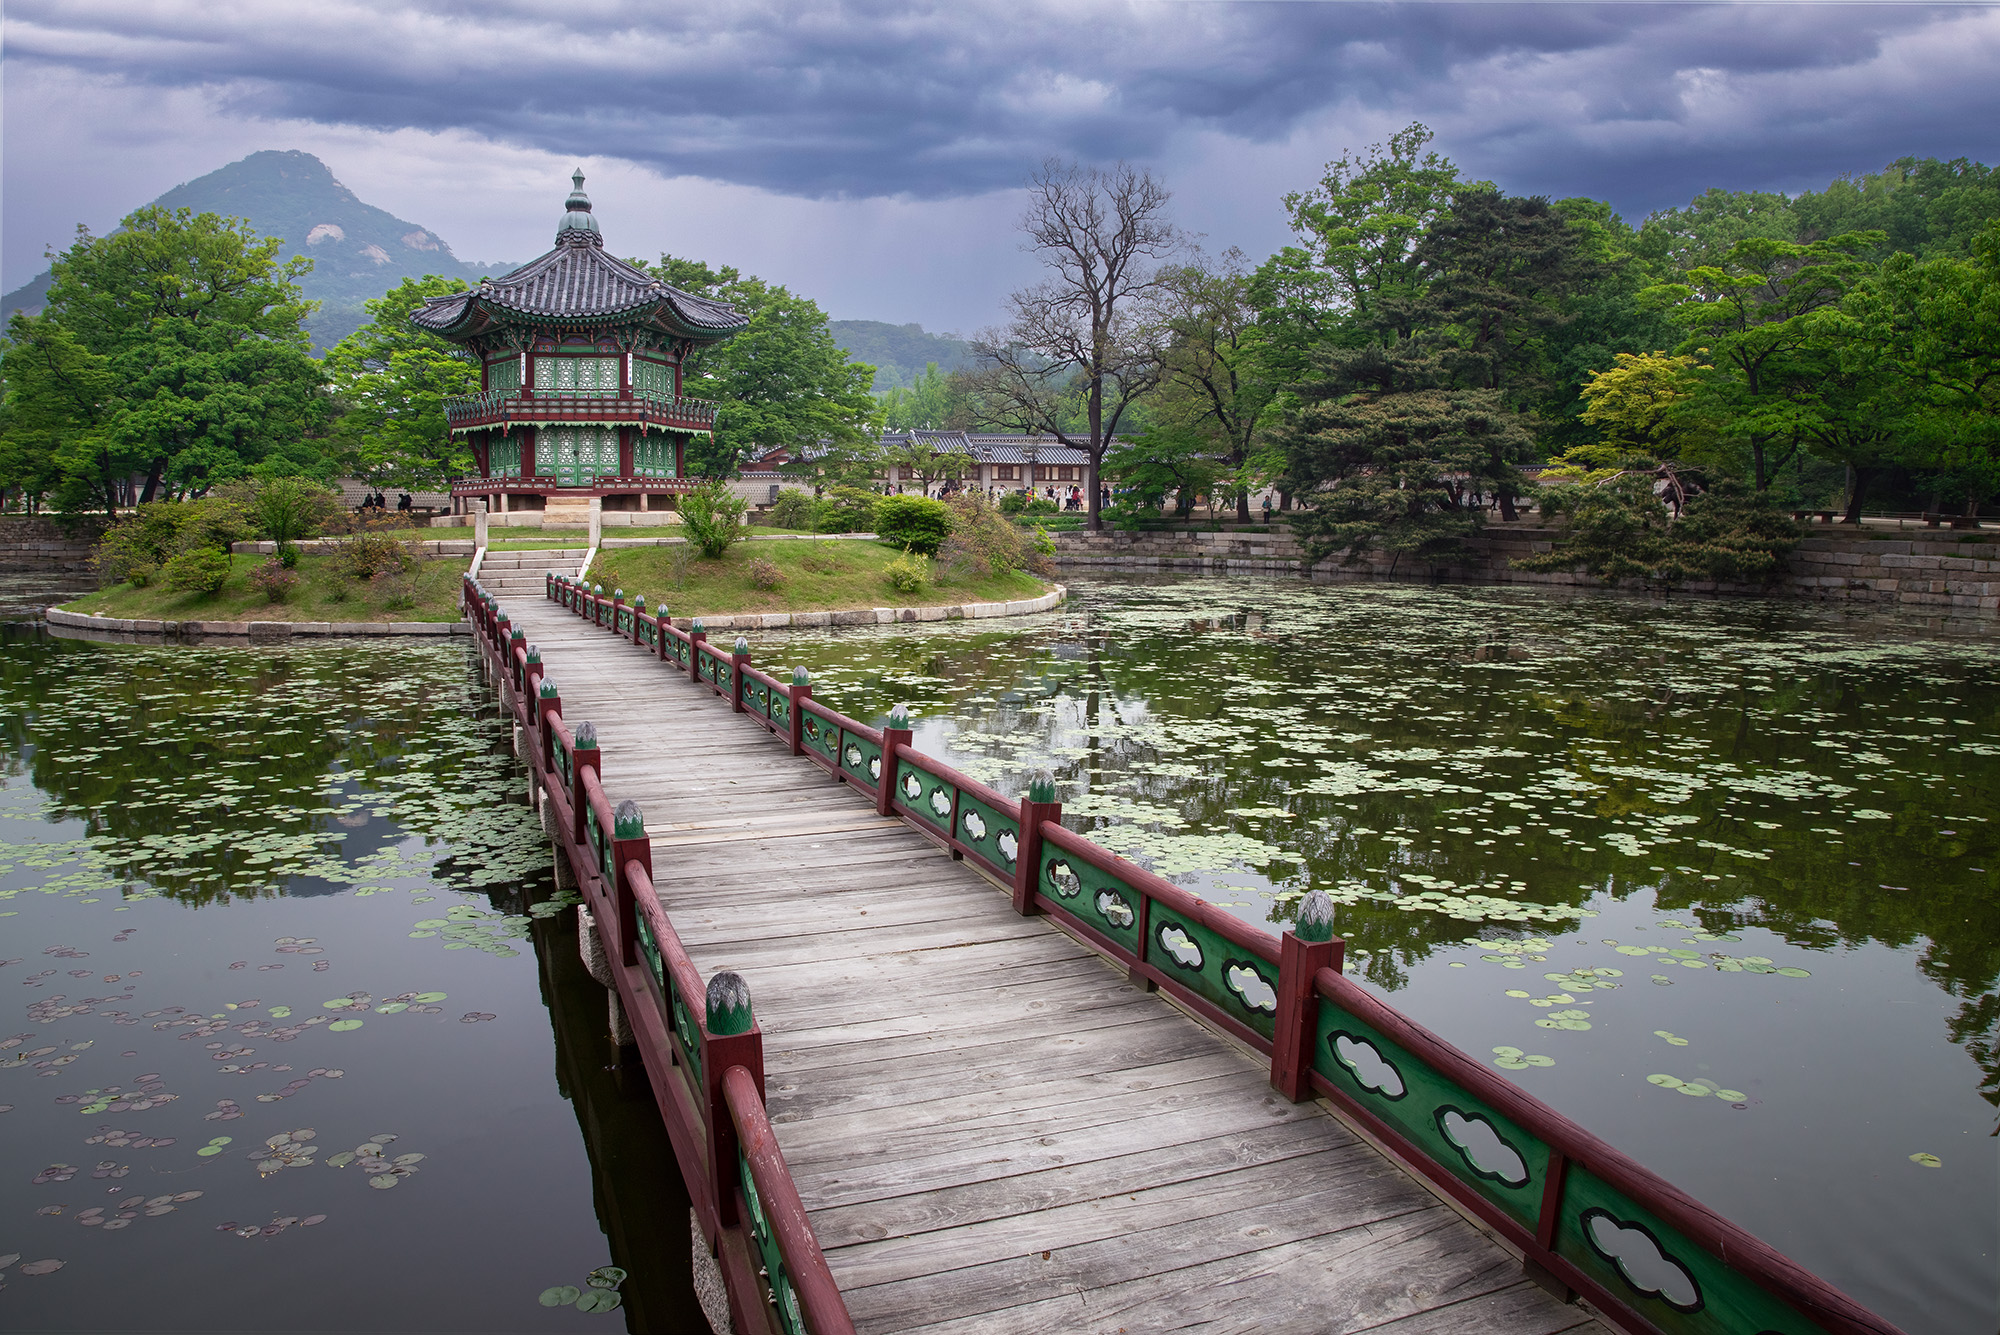 This image captures the enchanting Hyangwonjeong Pavilion in South Korea. The path begins at the bottom, guiding us through a...